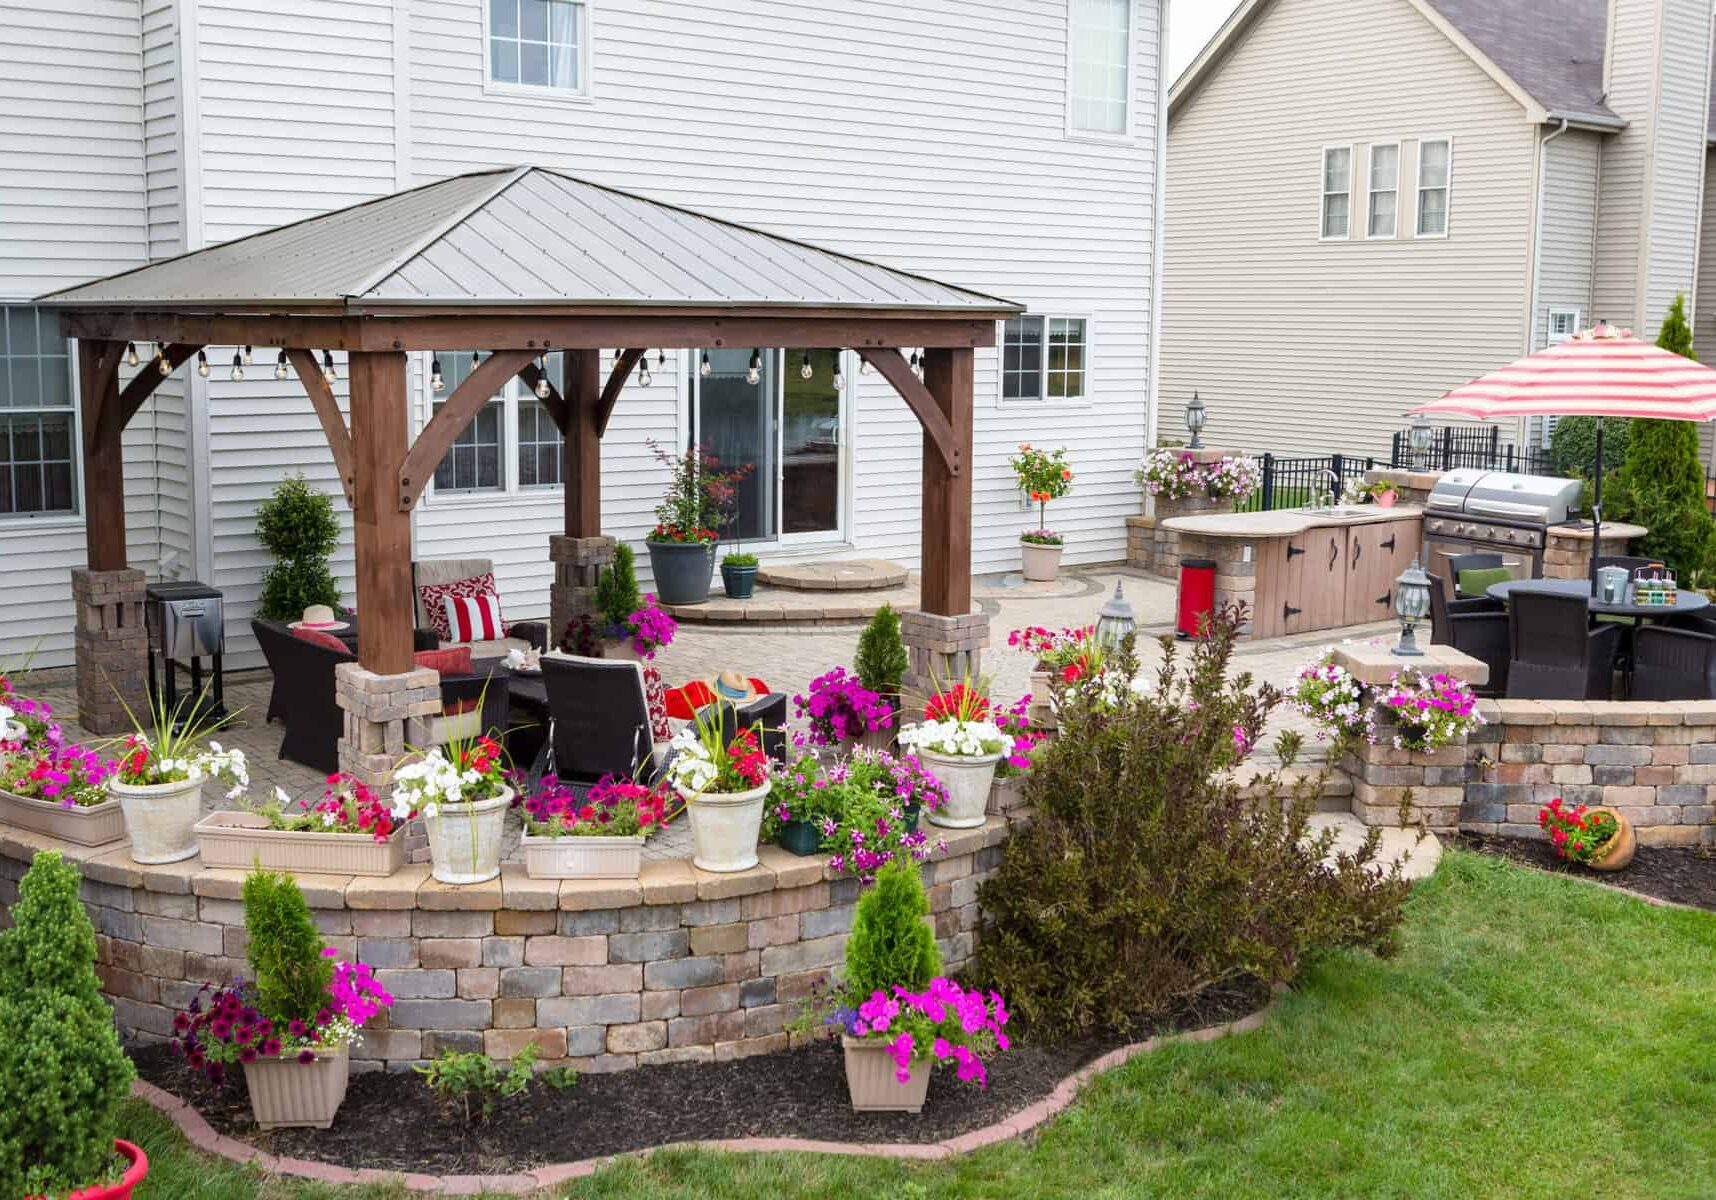 Colorful exterior curved patio with summer flowers and comfortable wicker armchairs under a covered wooden gazebo with aluminum roof in a neat upscale backyard